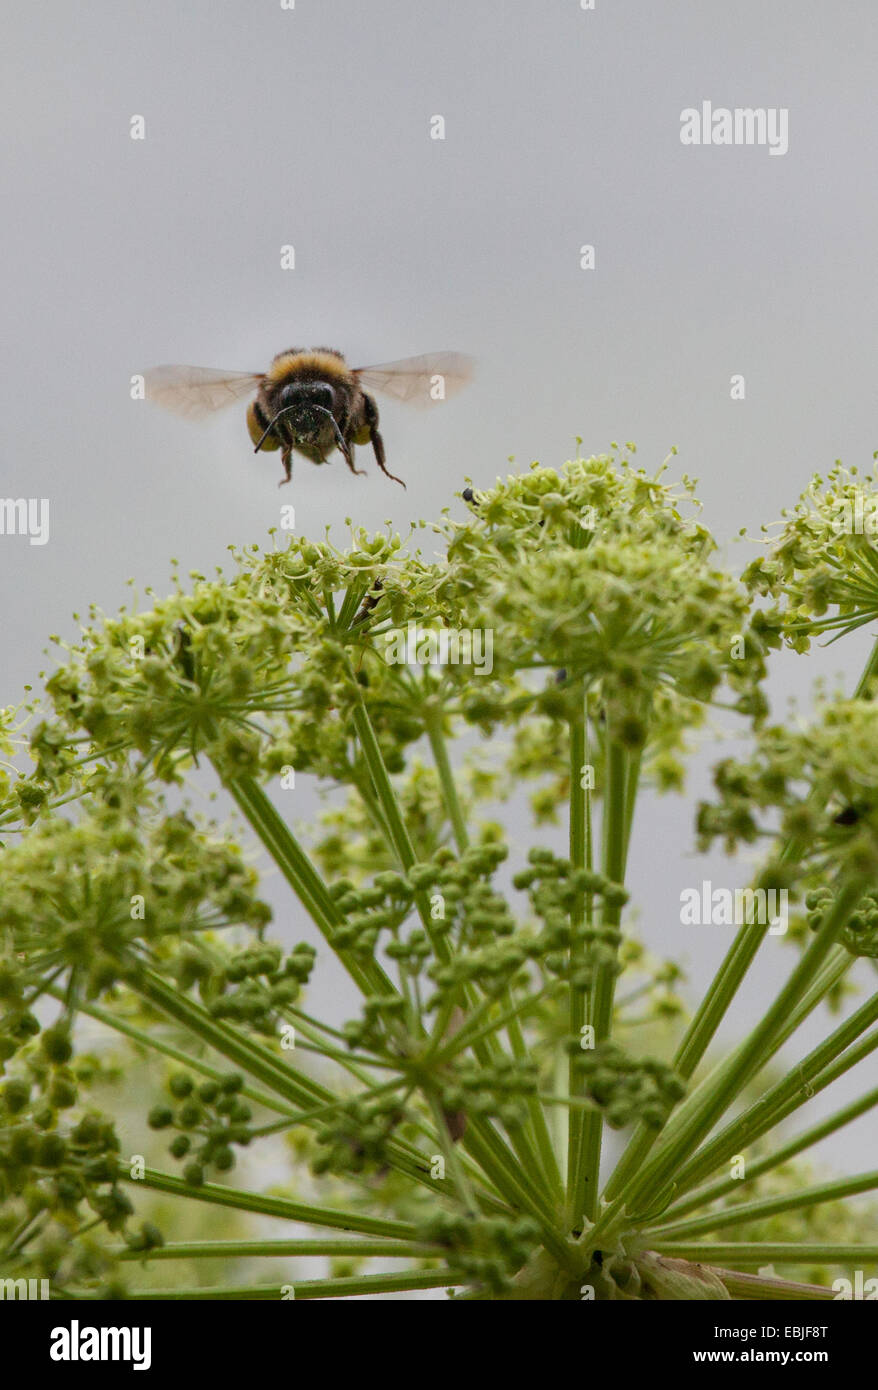 bumble bee flying to umbellifer, Germany Stock Photo